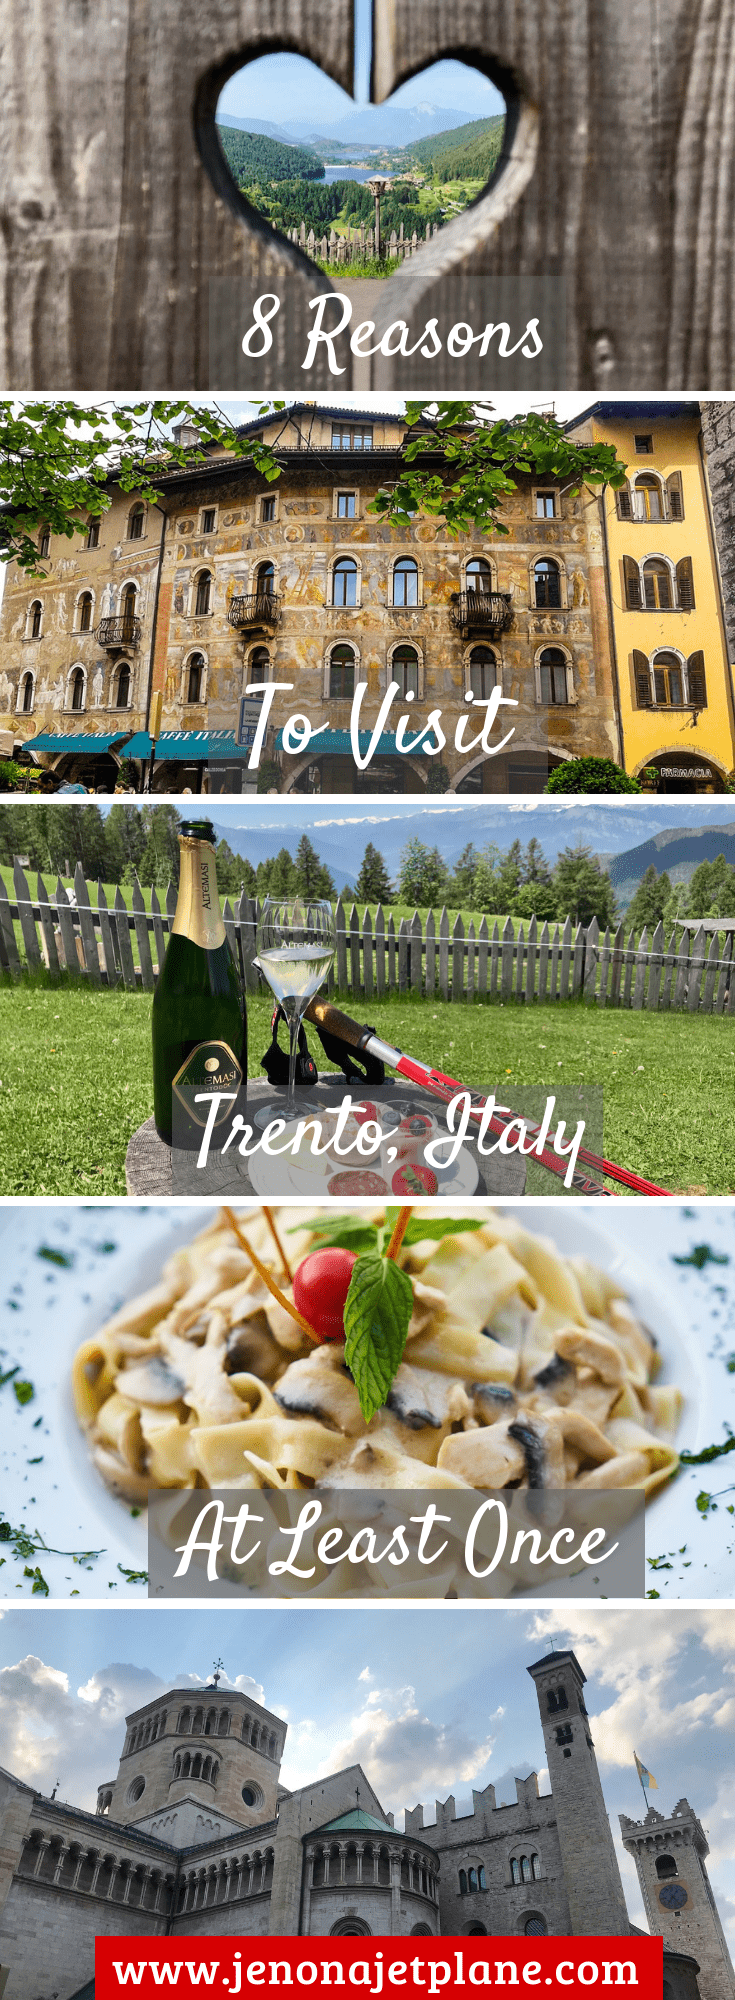 Thinking about visiting Trento, Italy? From its award winning Trento Doc brand to untouched natural experiences, here are 8 reasons why you need to add Trento, Italy to your bucket list! #trentoitaly #italytravel #bucketlist